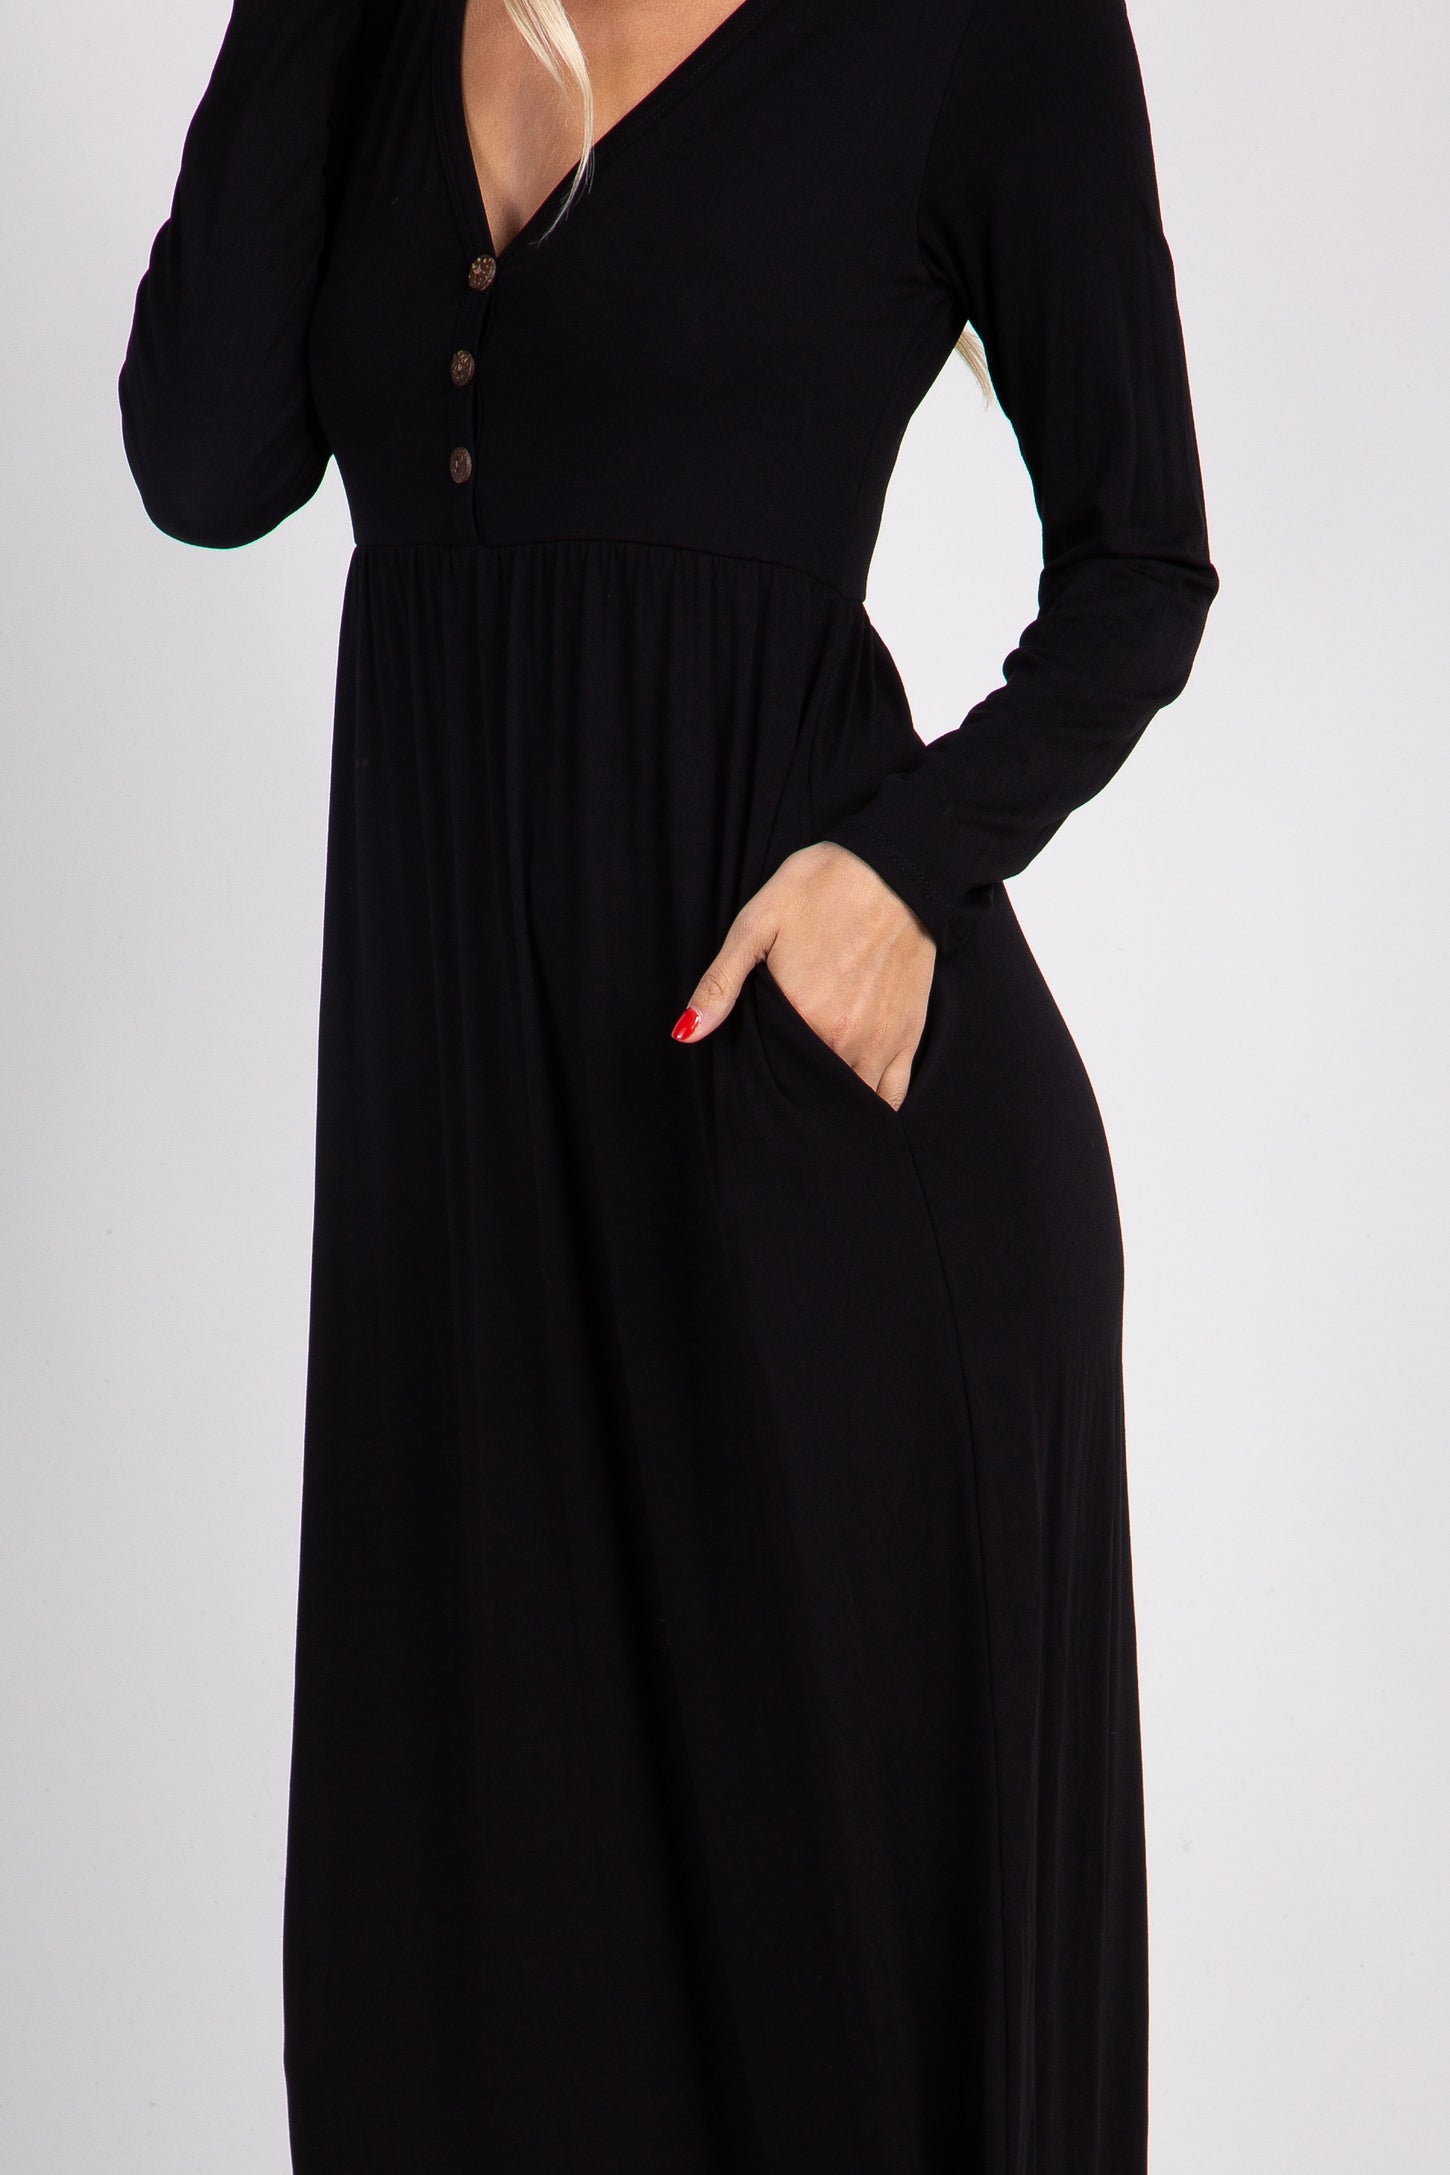 Black Solid Button Front Maxi Dress